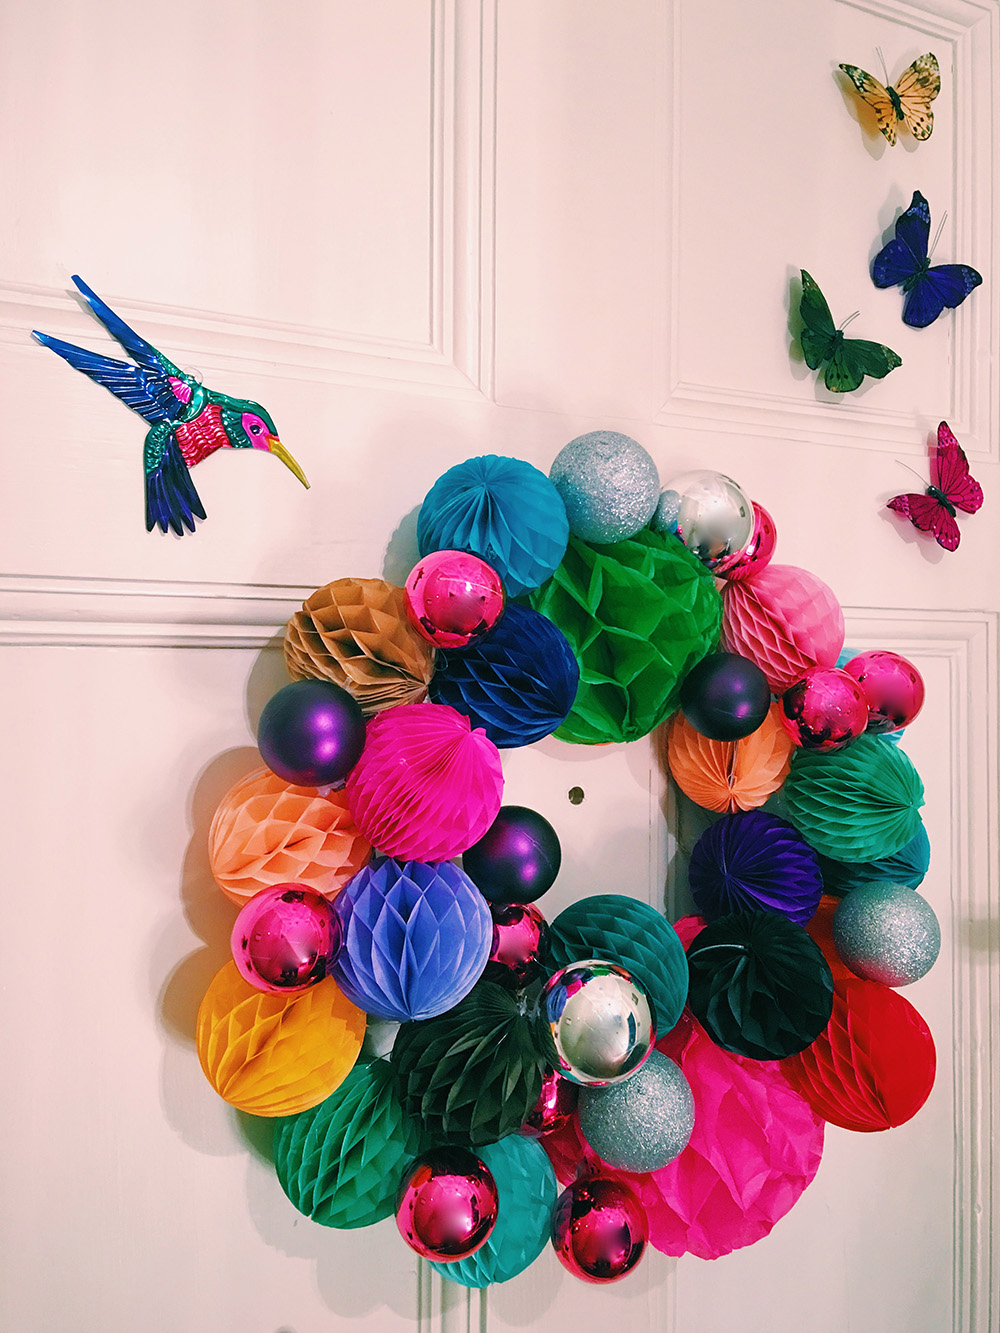 TA-DA! One modern, colourful door wreath can then be hung in your home.